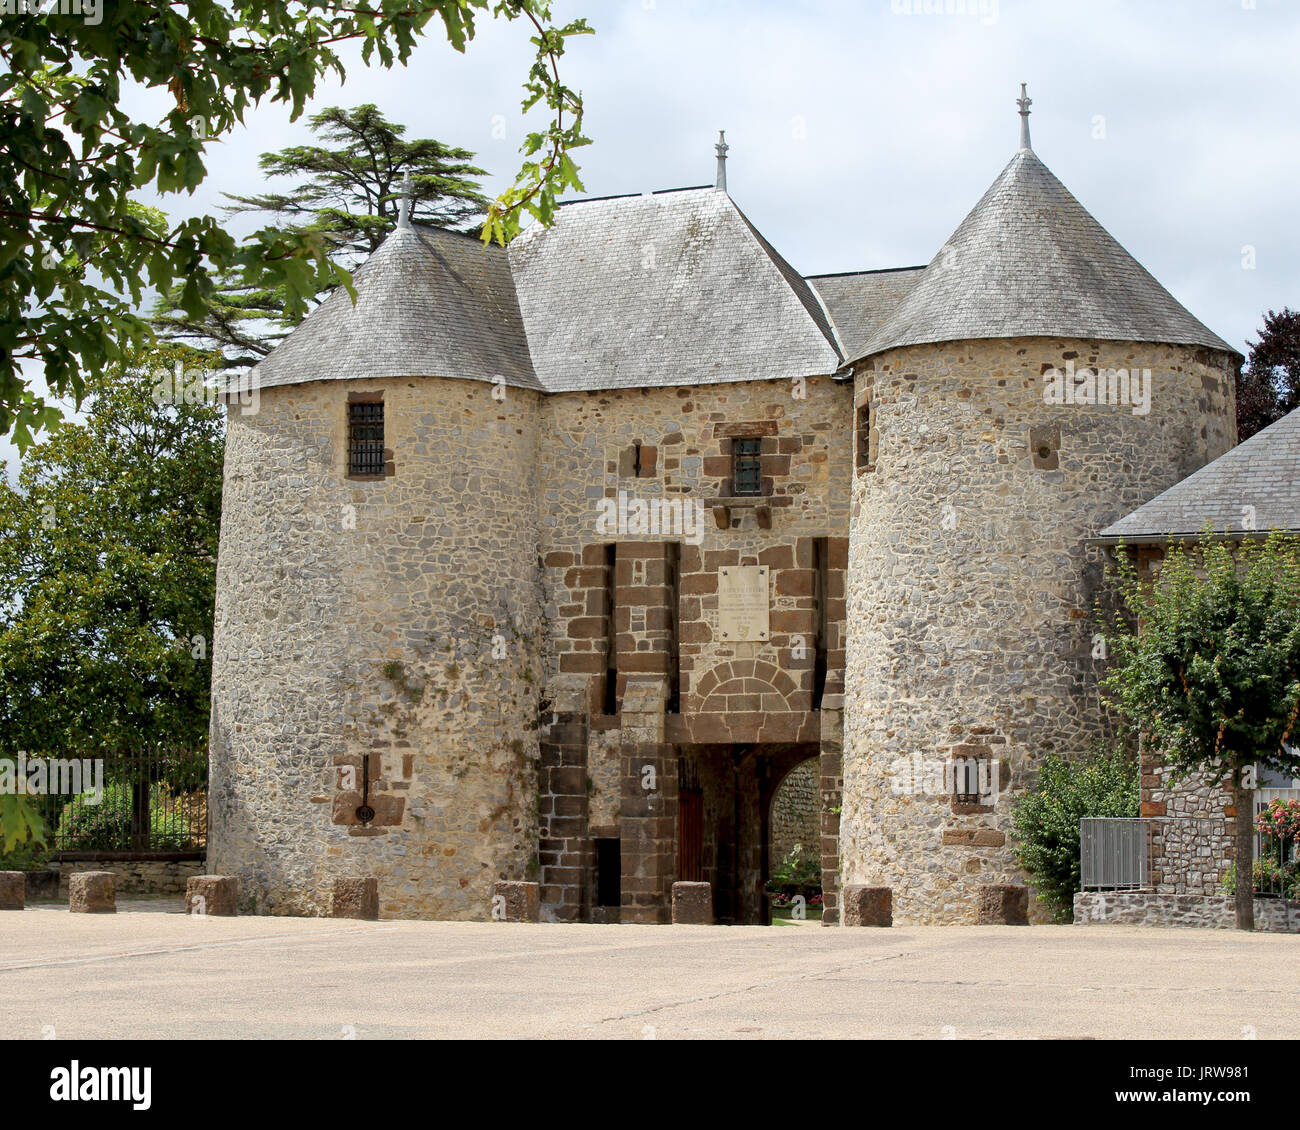 The medieval entrance gate to Fresnay Castle in Fresnay-sur-Sarthe in the Pays de Loire region of Western France. Stock Photo